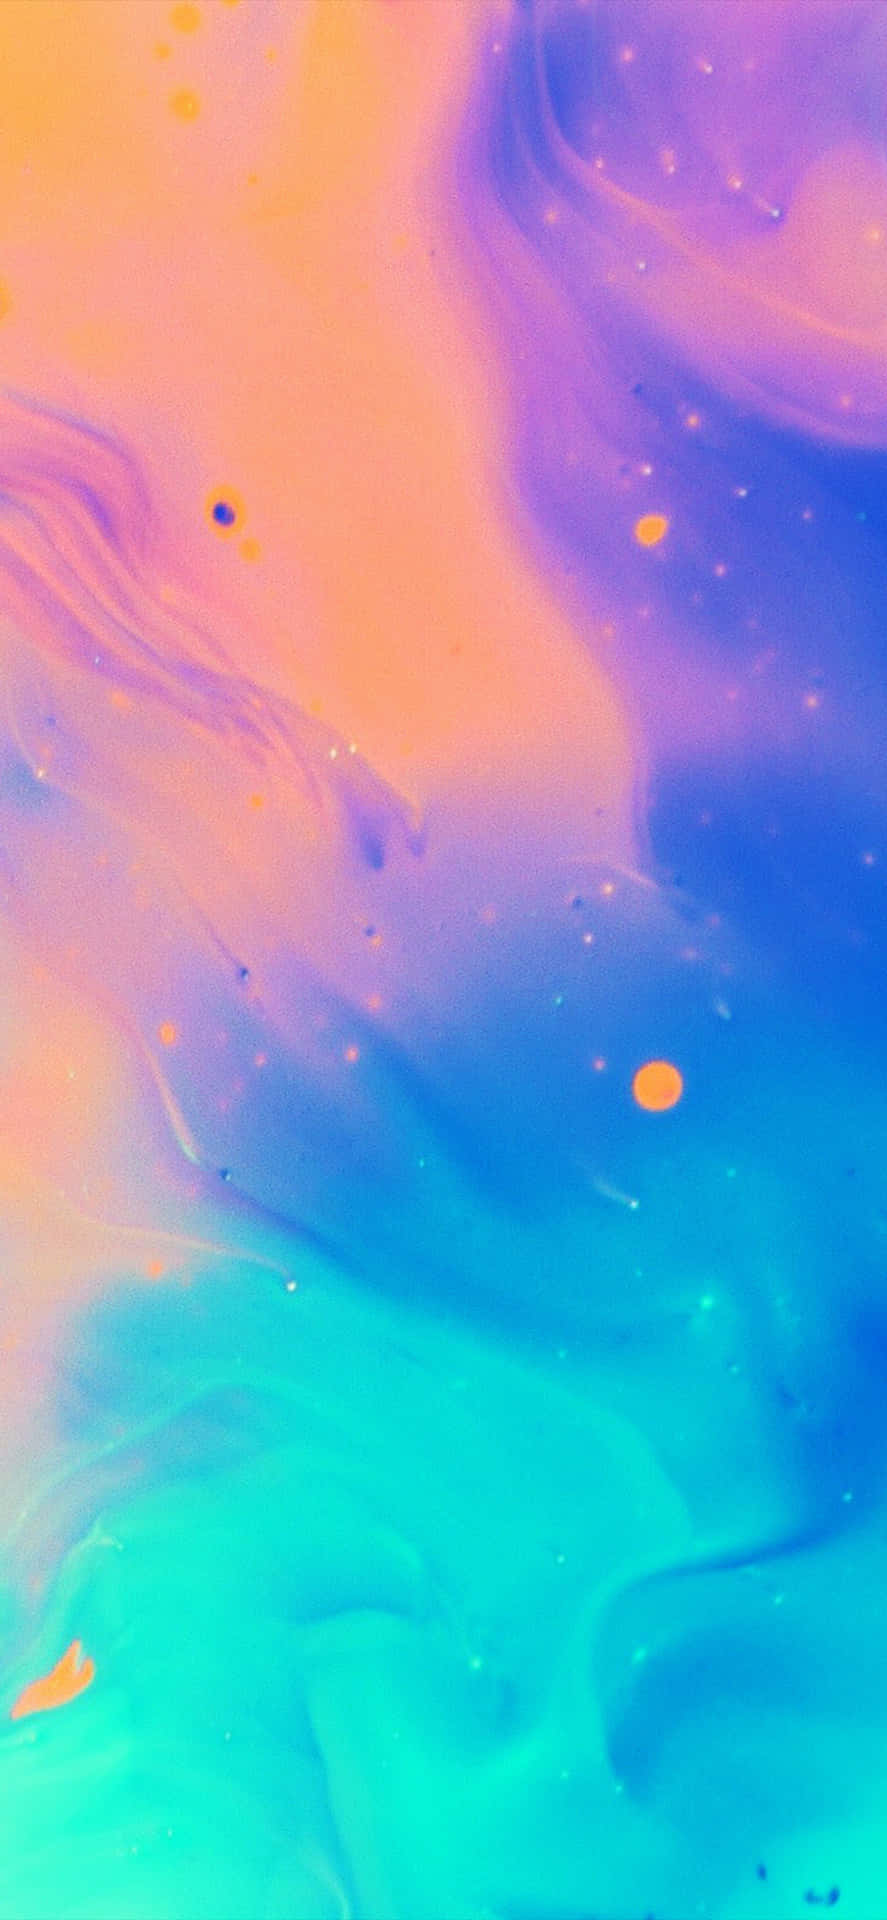 "Make Your Phone as Colorful as Your Life with a Pastel Rainbow Iphone" Wallpaper